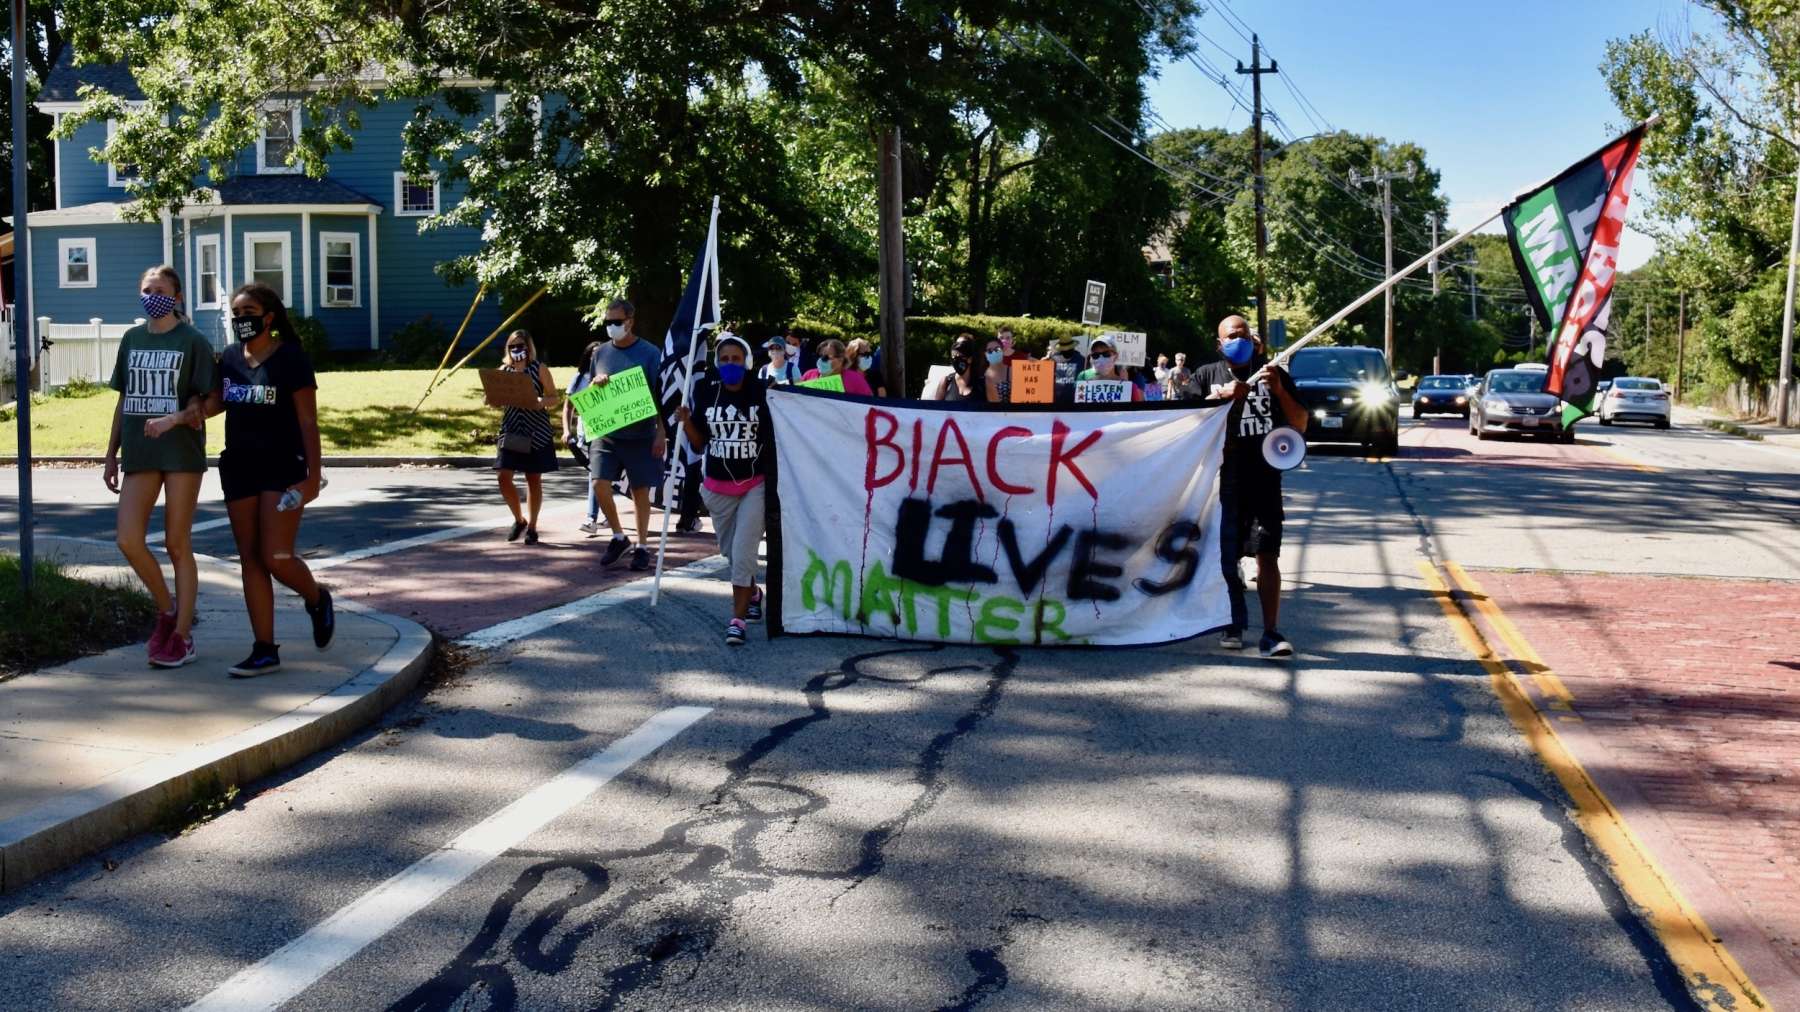 The rally for Black lives gets loud in Barrington